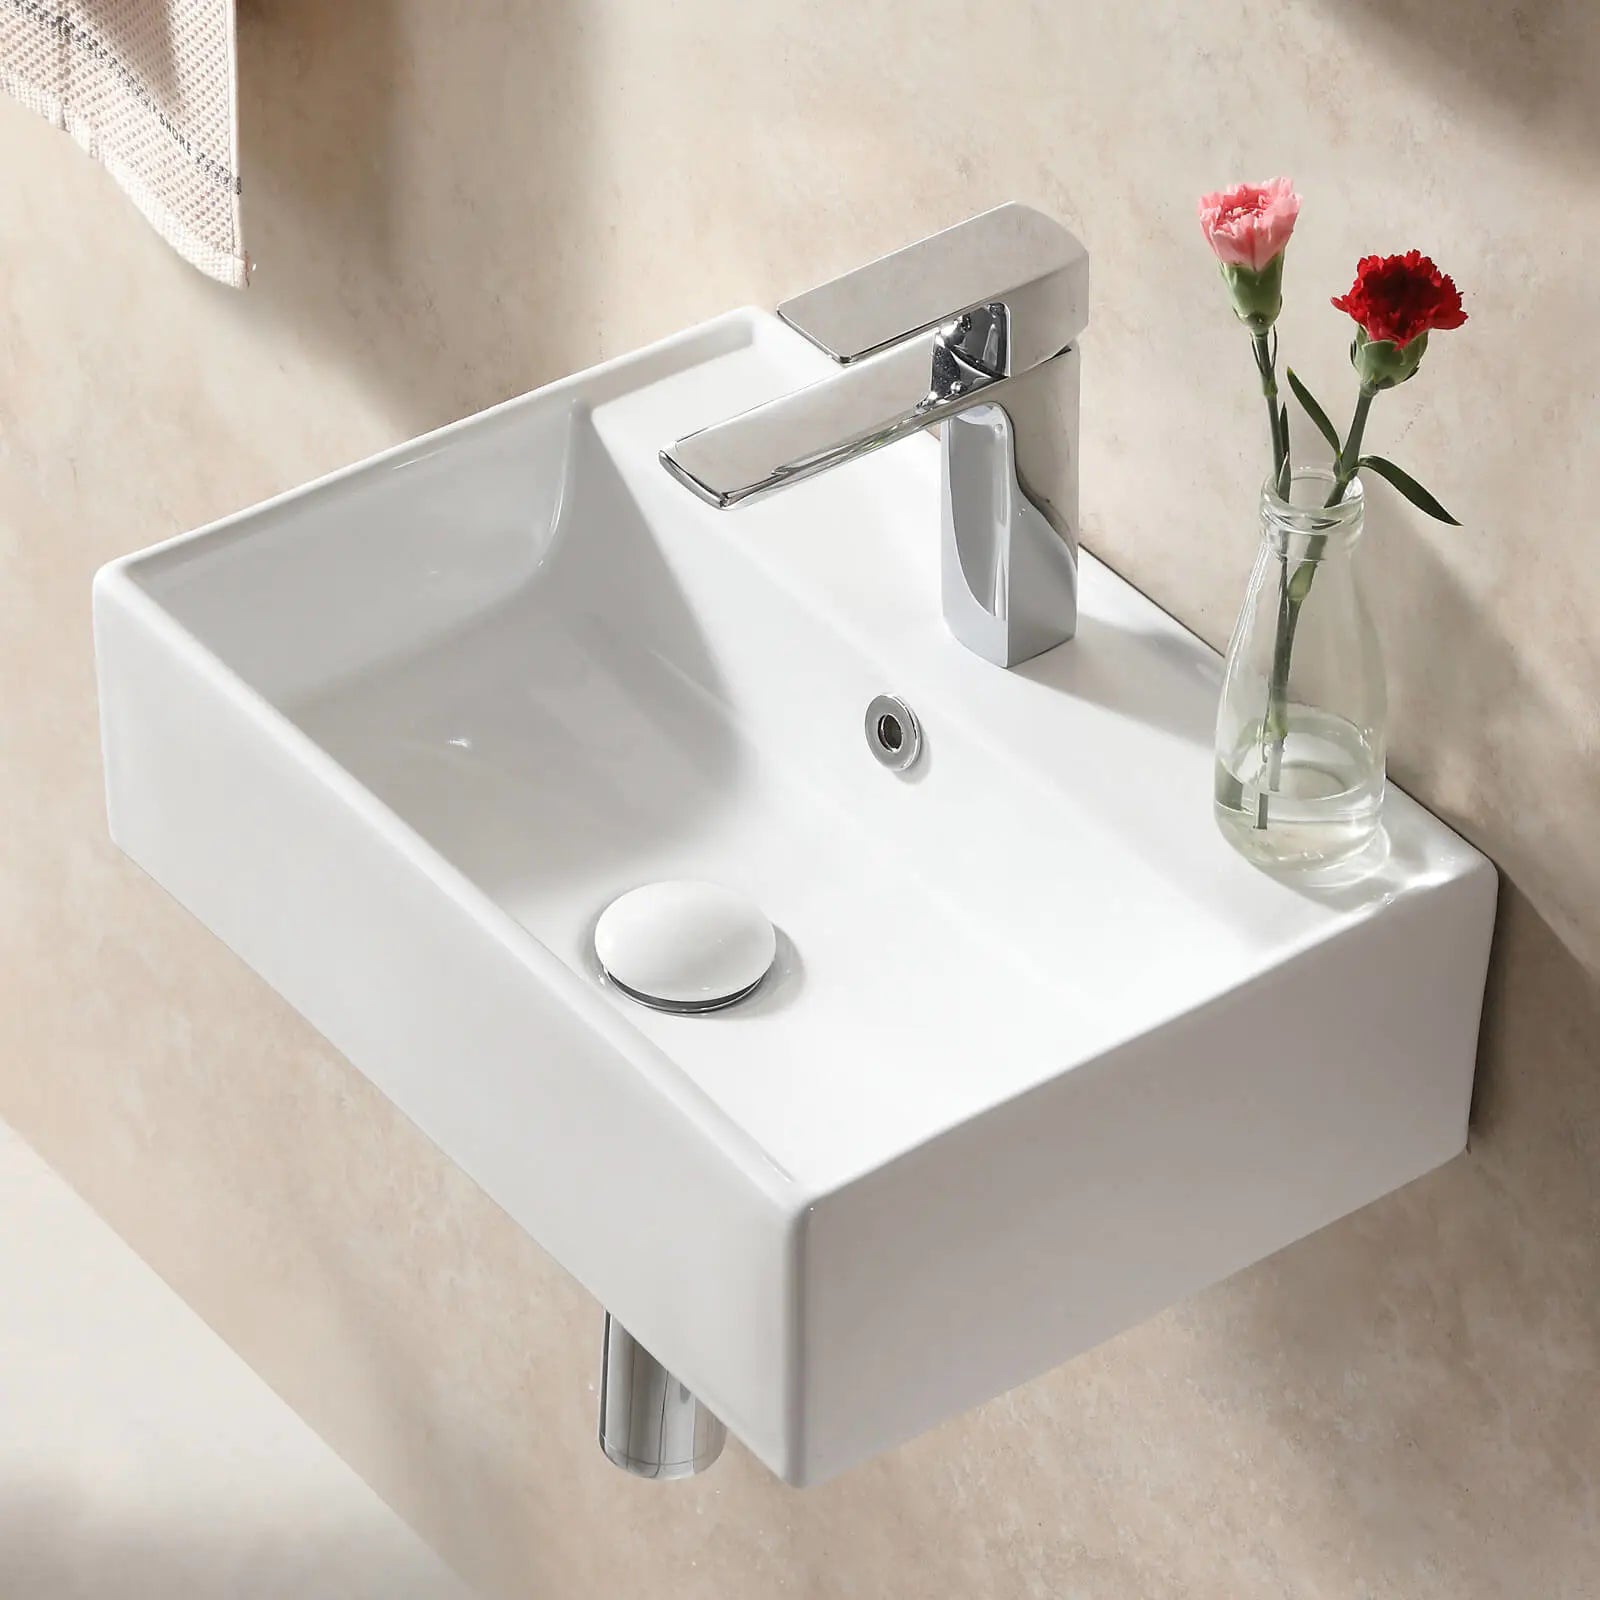 HOROW Wall Mounted Bathroom Sink With Single Faucet Hole Model HWTP-S4531W